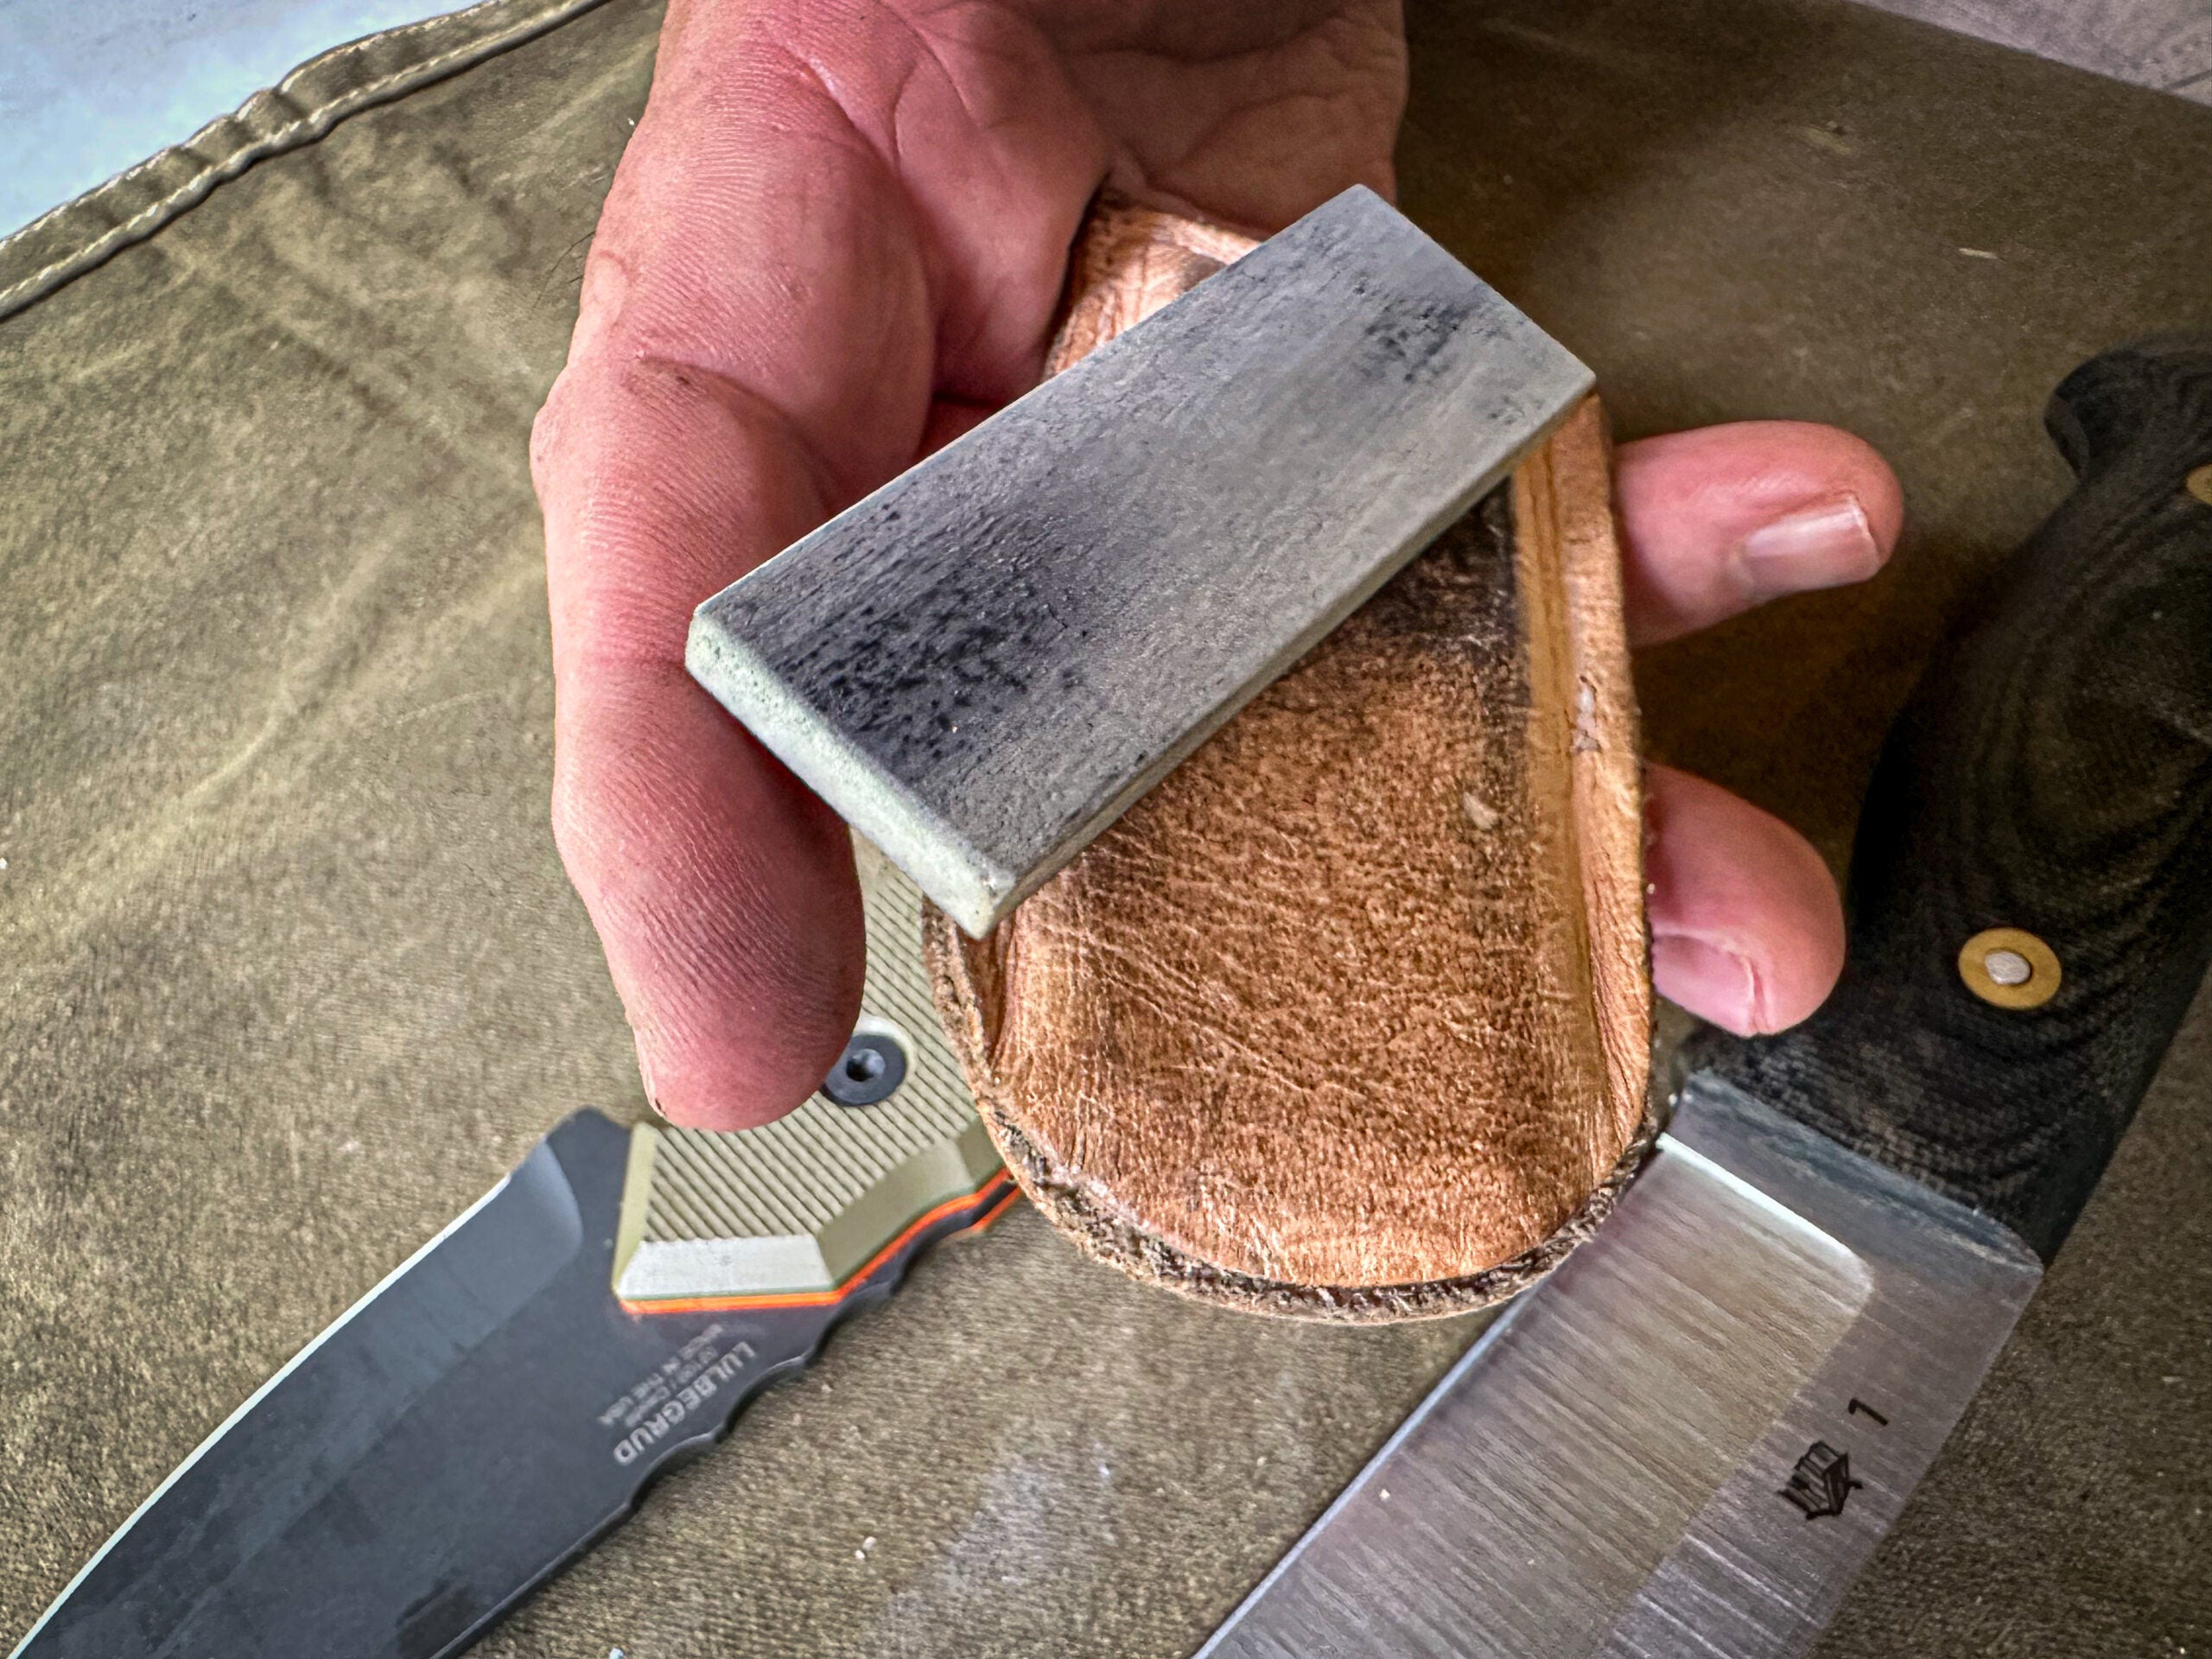 Small knife sharpening stone sits on a leather case